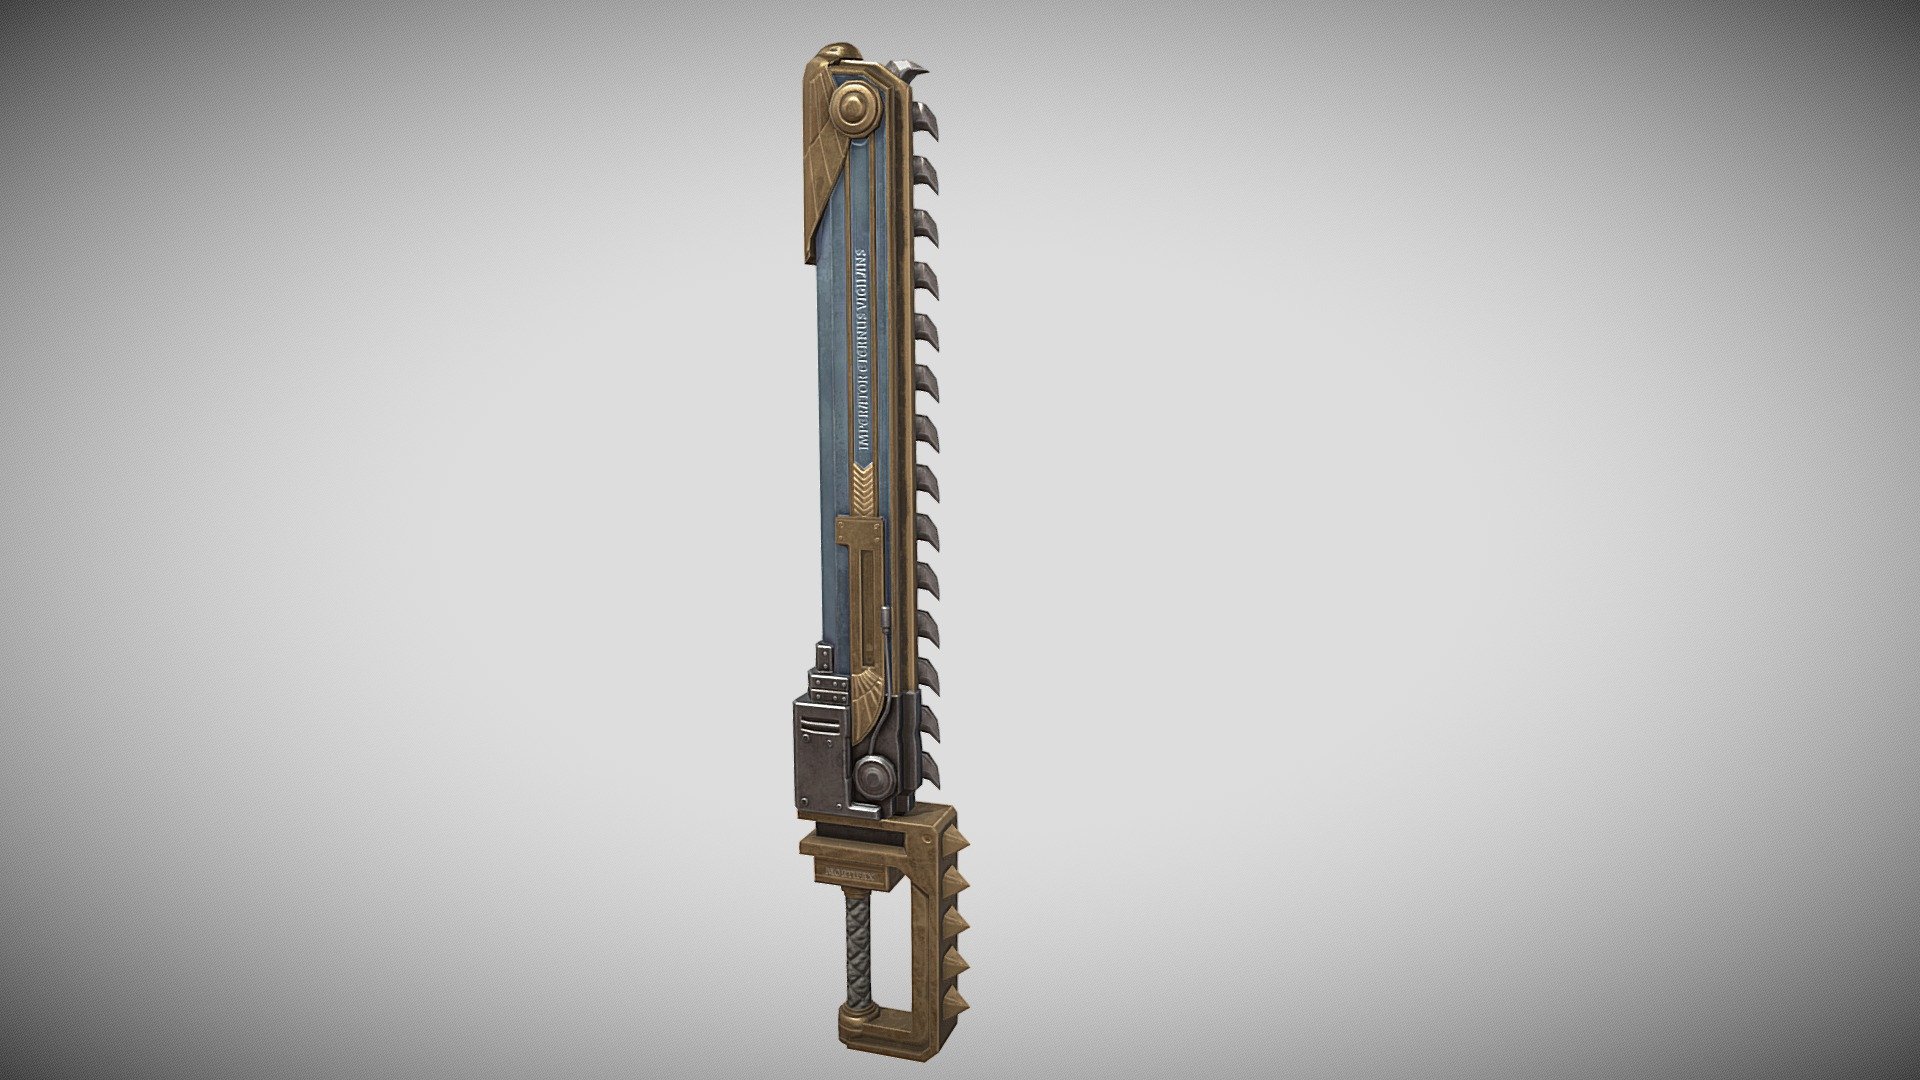 shoutout to jpeg that pixelated most of the textures - Warhammer 40k - Chainsword - 3D model by Noxxe23 3d model